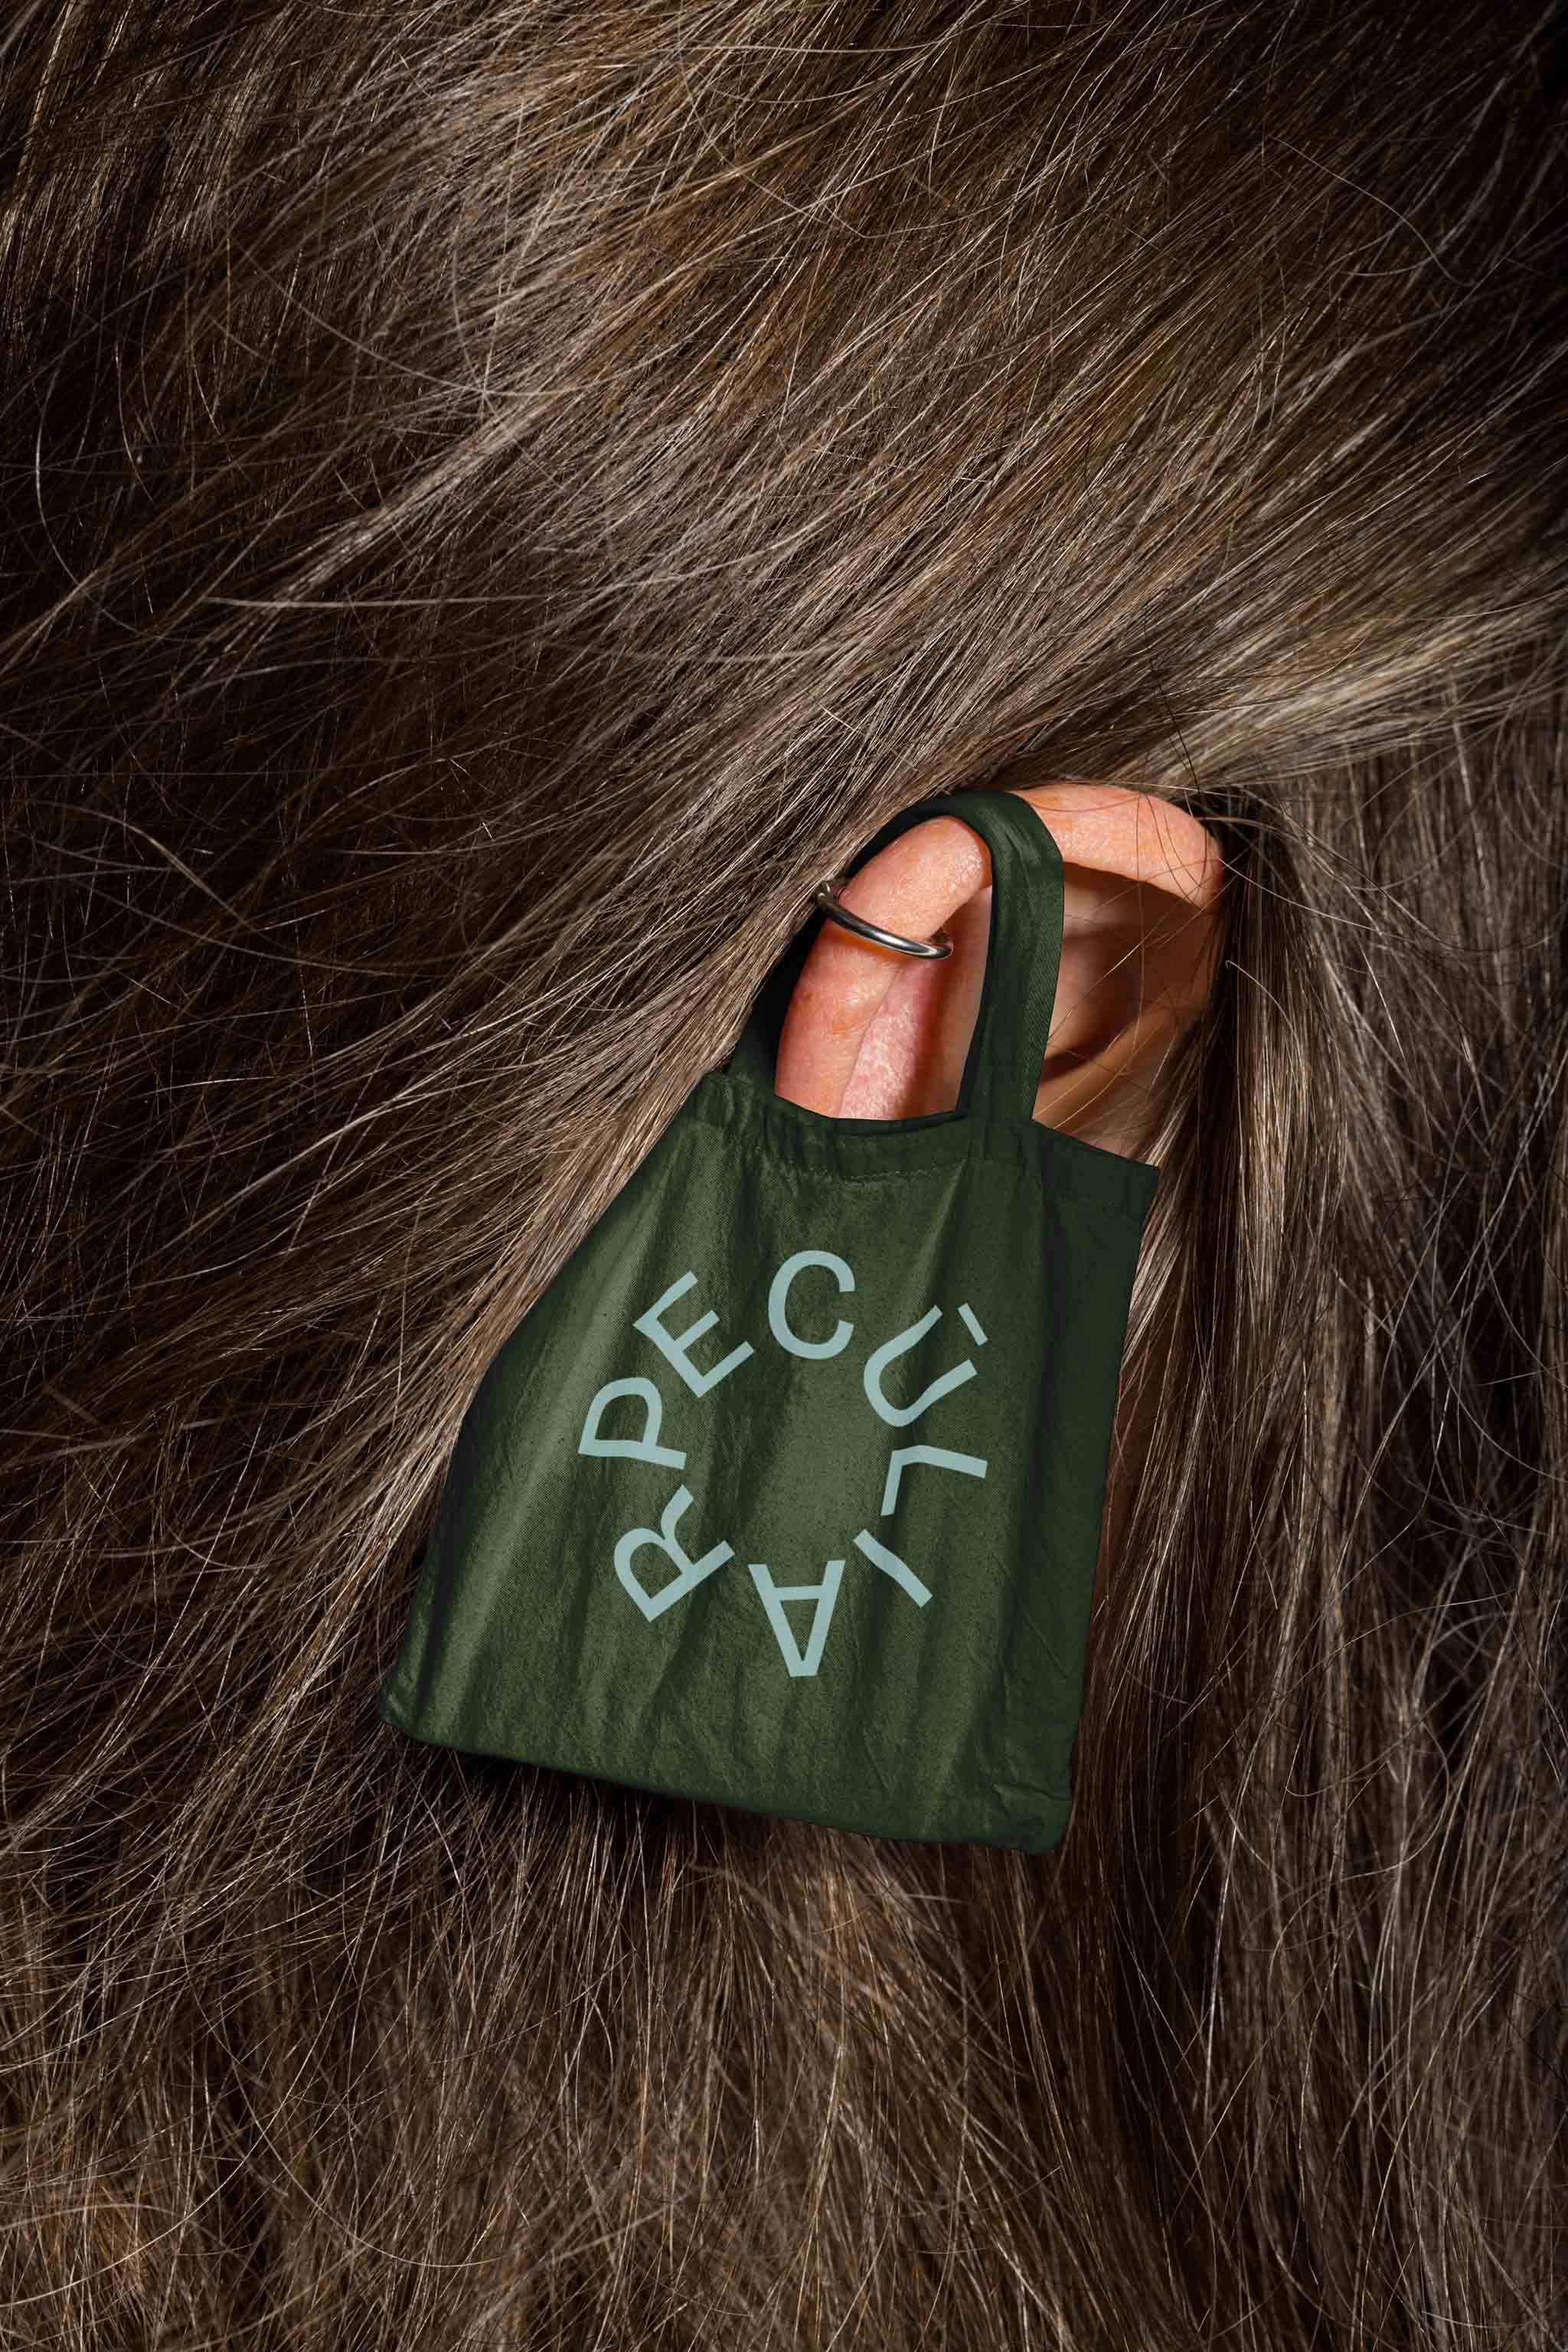 Canvas tote bag mockup hung on a person's ear amid dark wavy hair, in use example alternative colors.